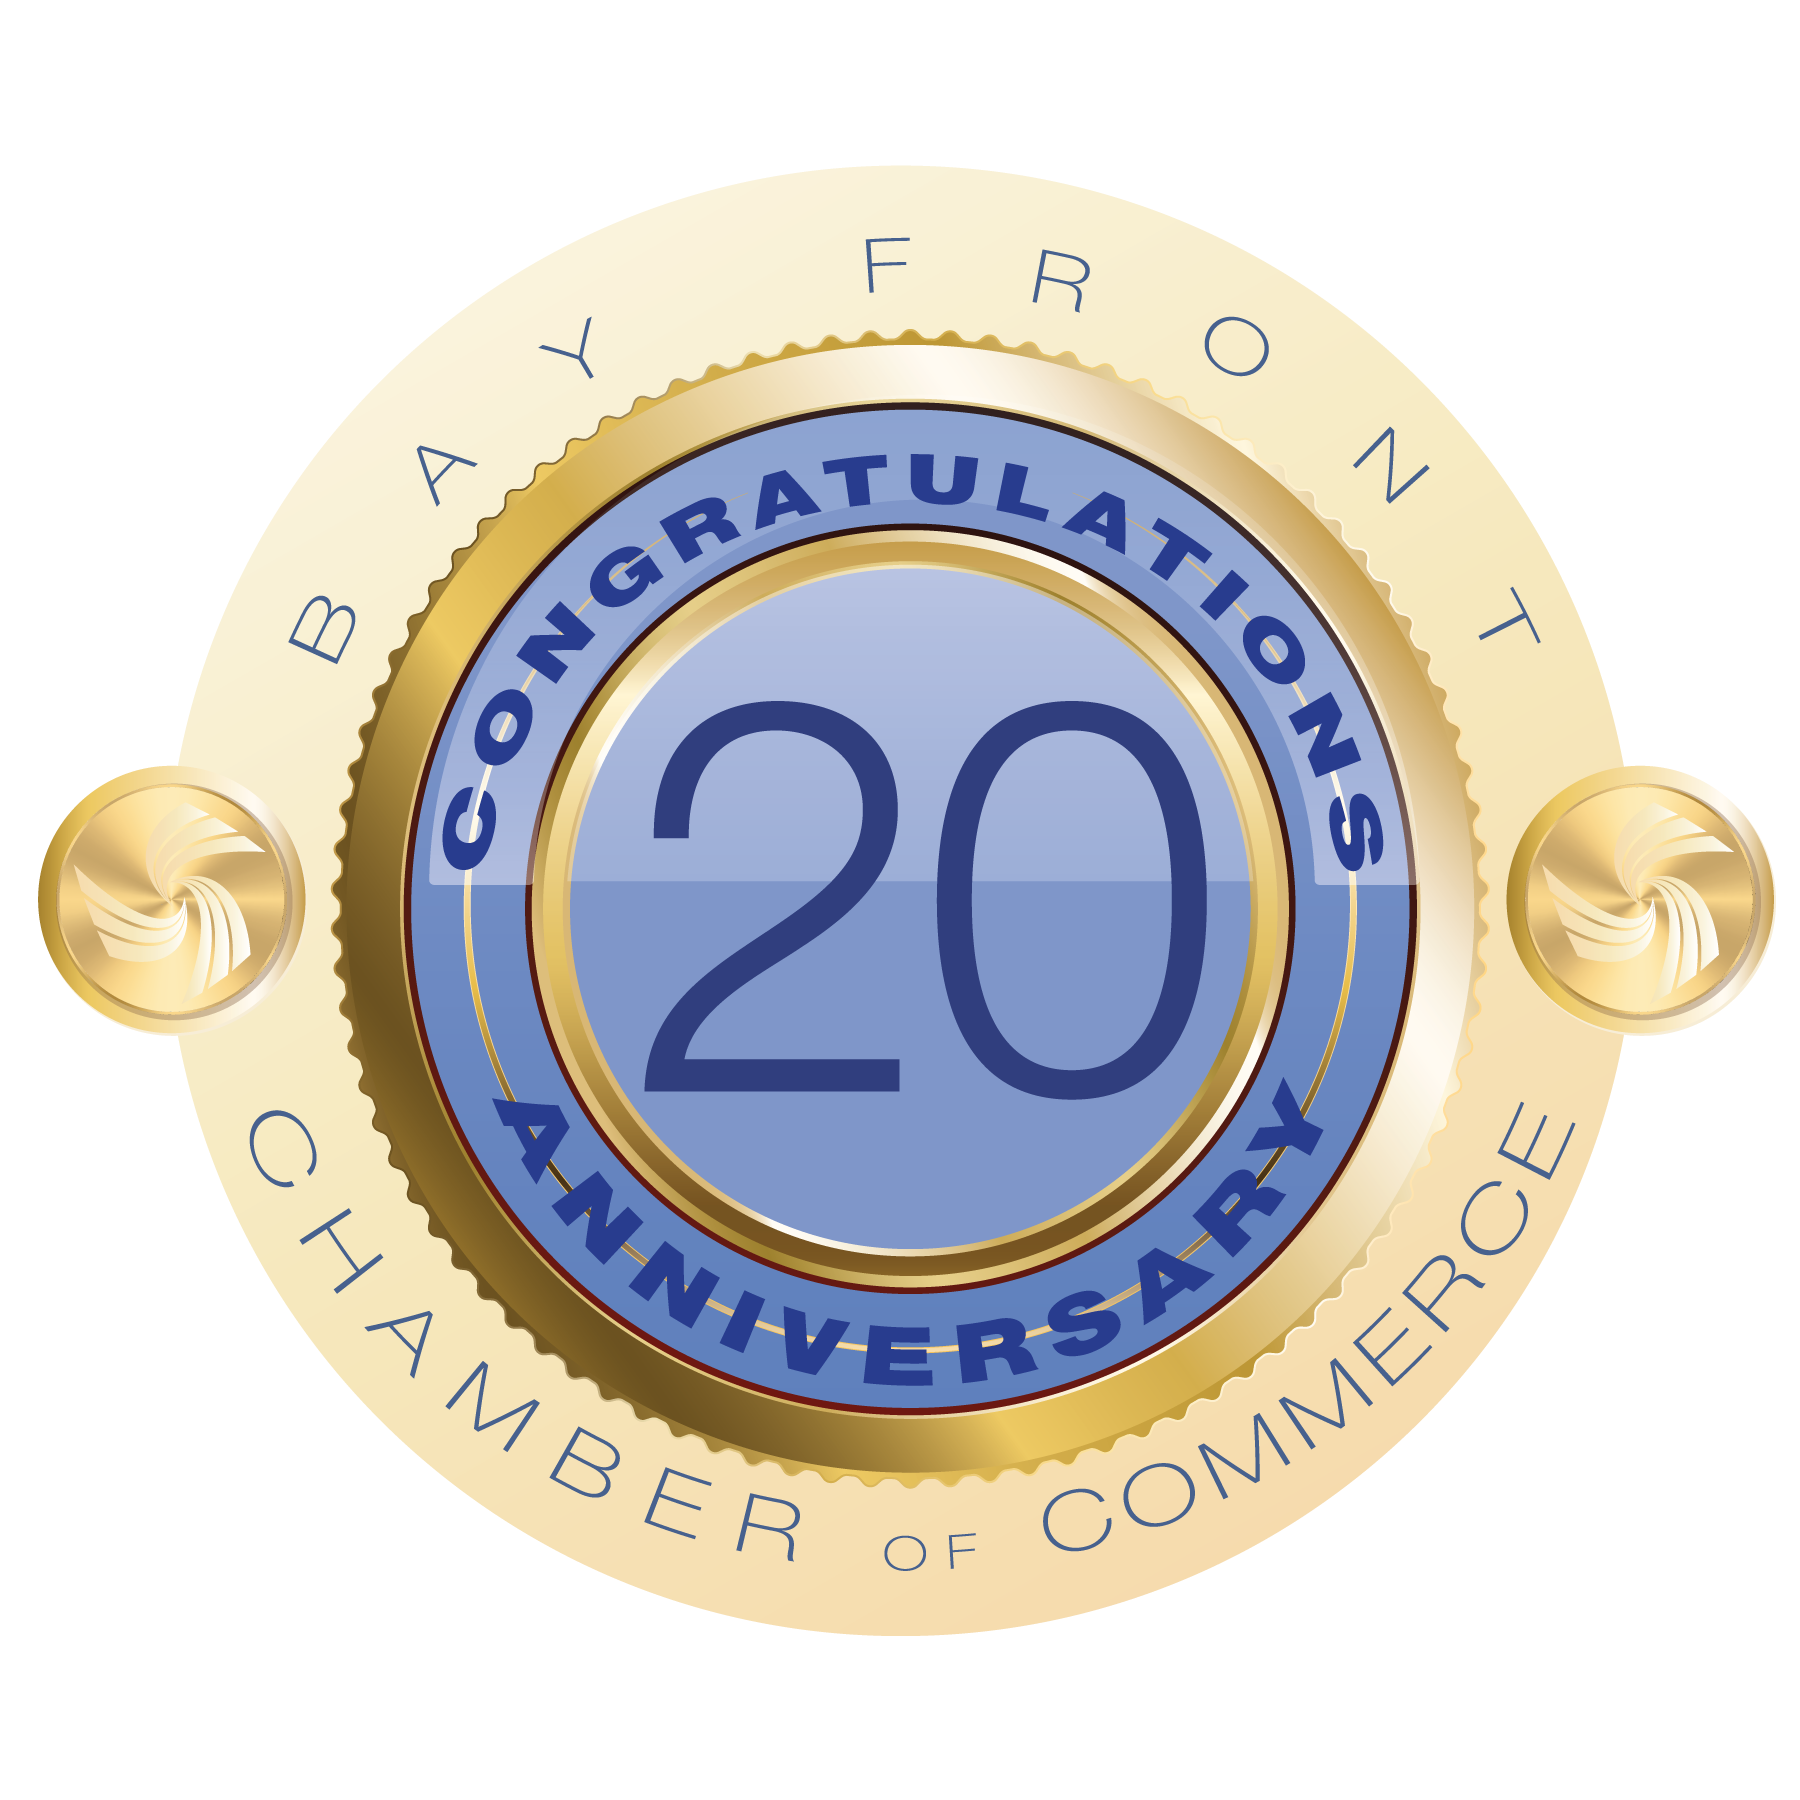 Communications Team powered by Malaga Corp Bay-Front-Chamber-Anniversary-Badge.20-YEARS